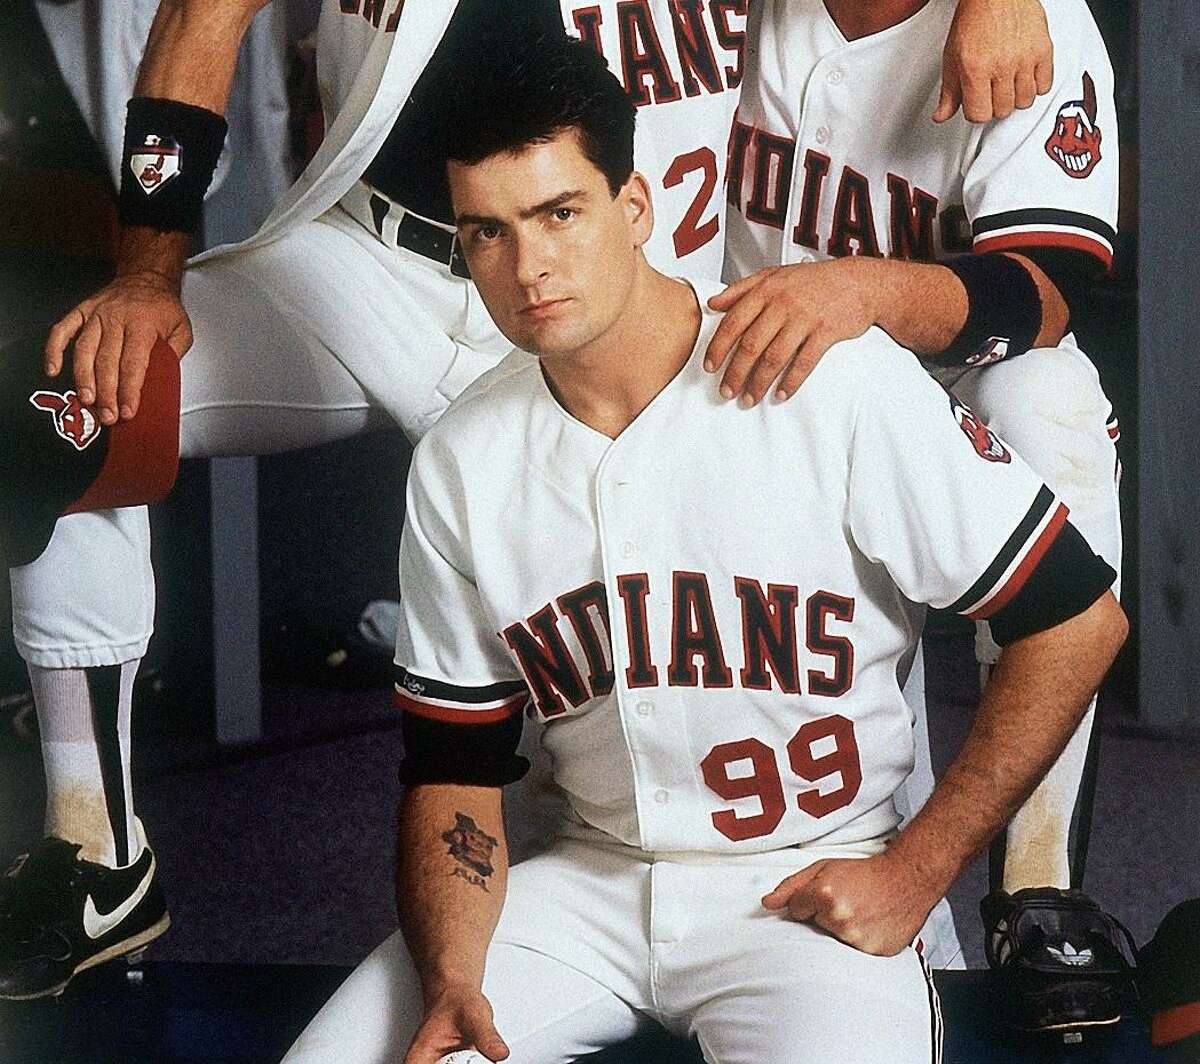 Charlie Sheen wants to make another Major League sequel